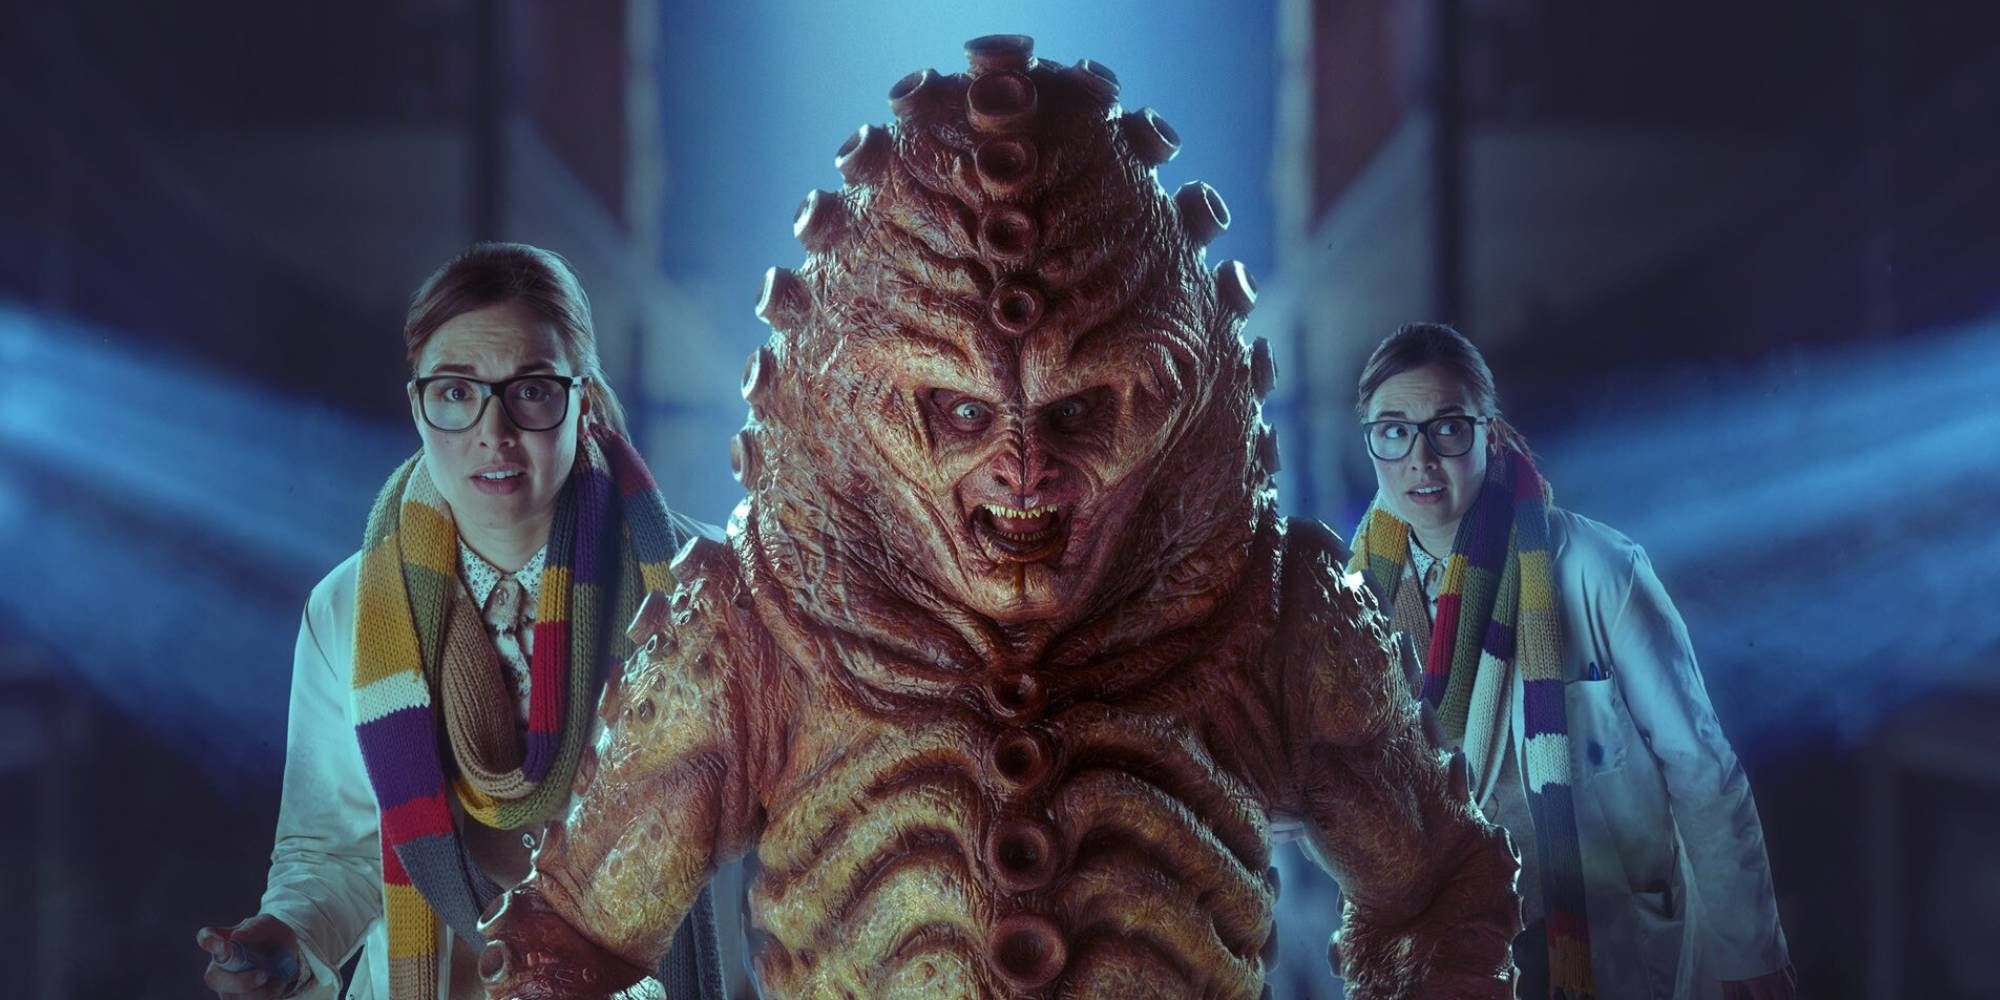 A red alien known as the Zygon with Osgood in the background